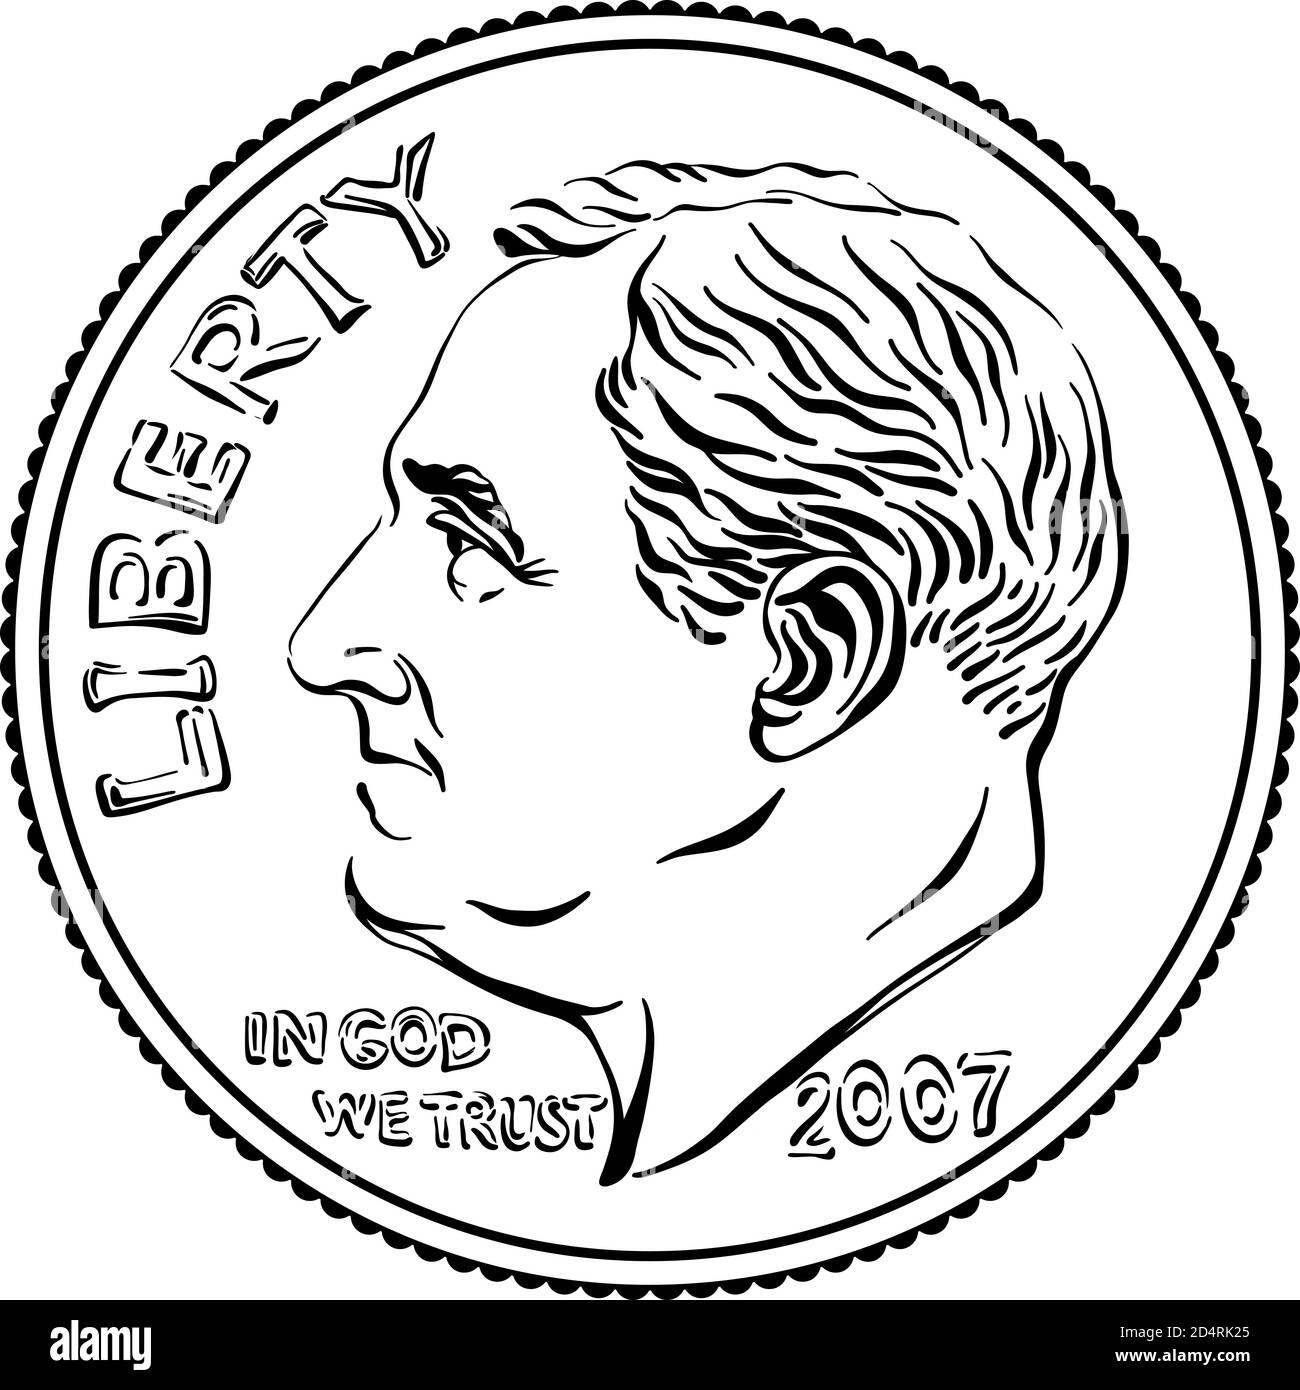 American money Roosevelt dime, United States one dime or 10-cent silver coin with President Franklin D Roosevelt on obverse. Black and white image Stock Vector